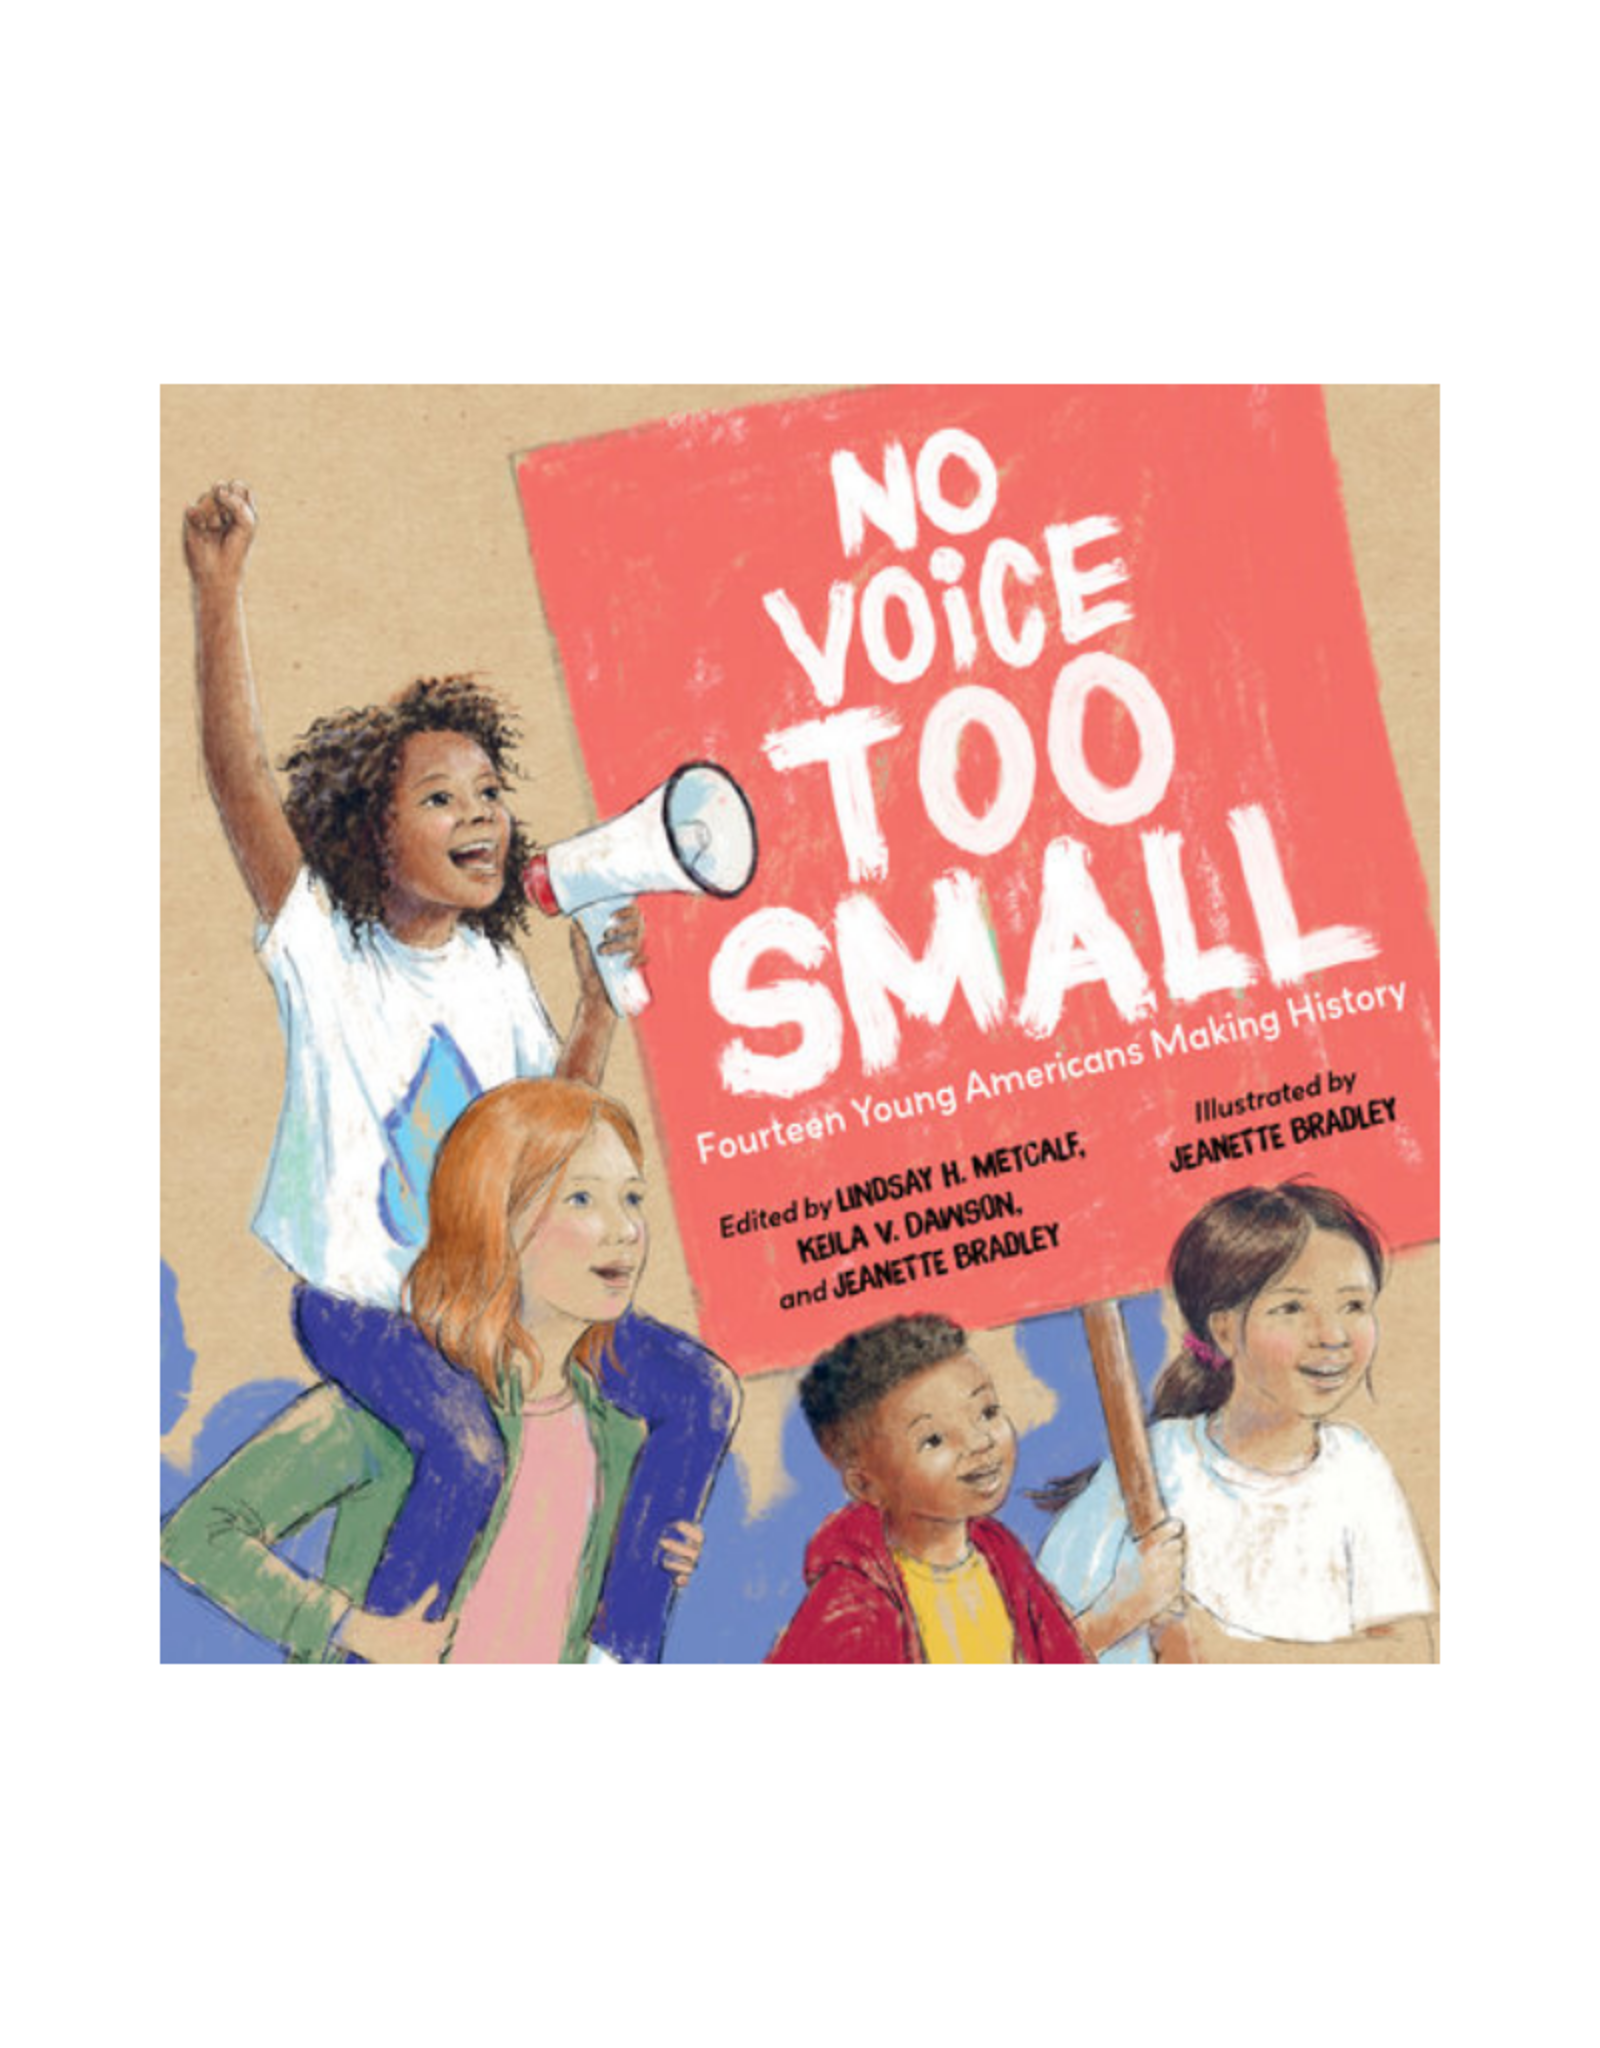 No Voice Too Small: 14 Young Americans Making History By Lindsay H. Metcalf